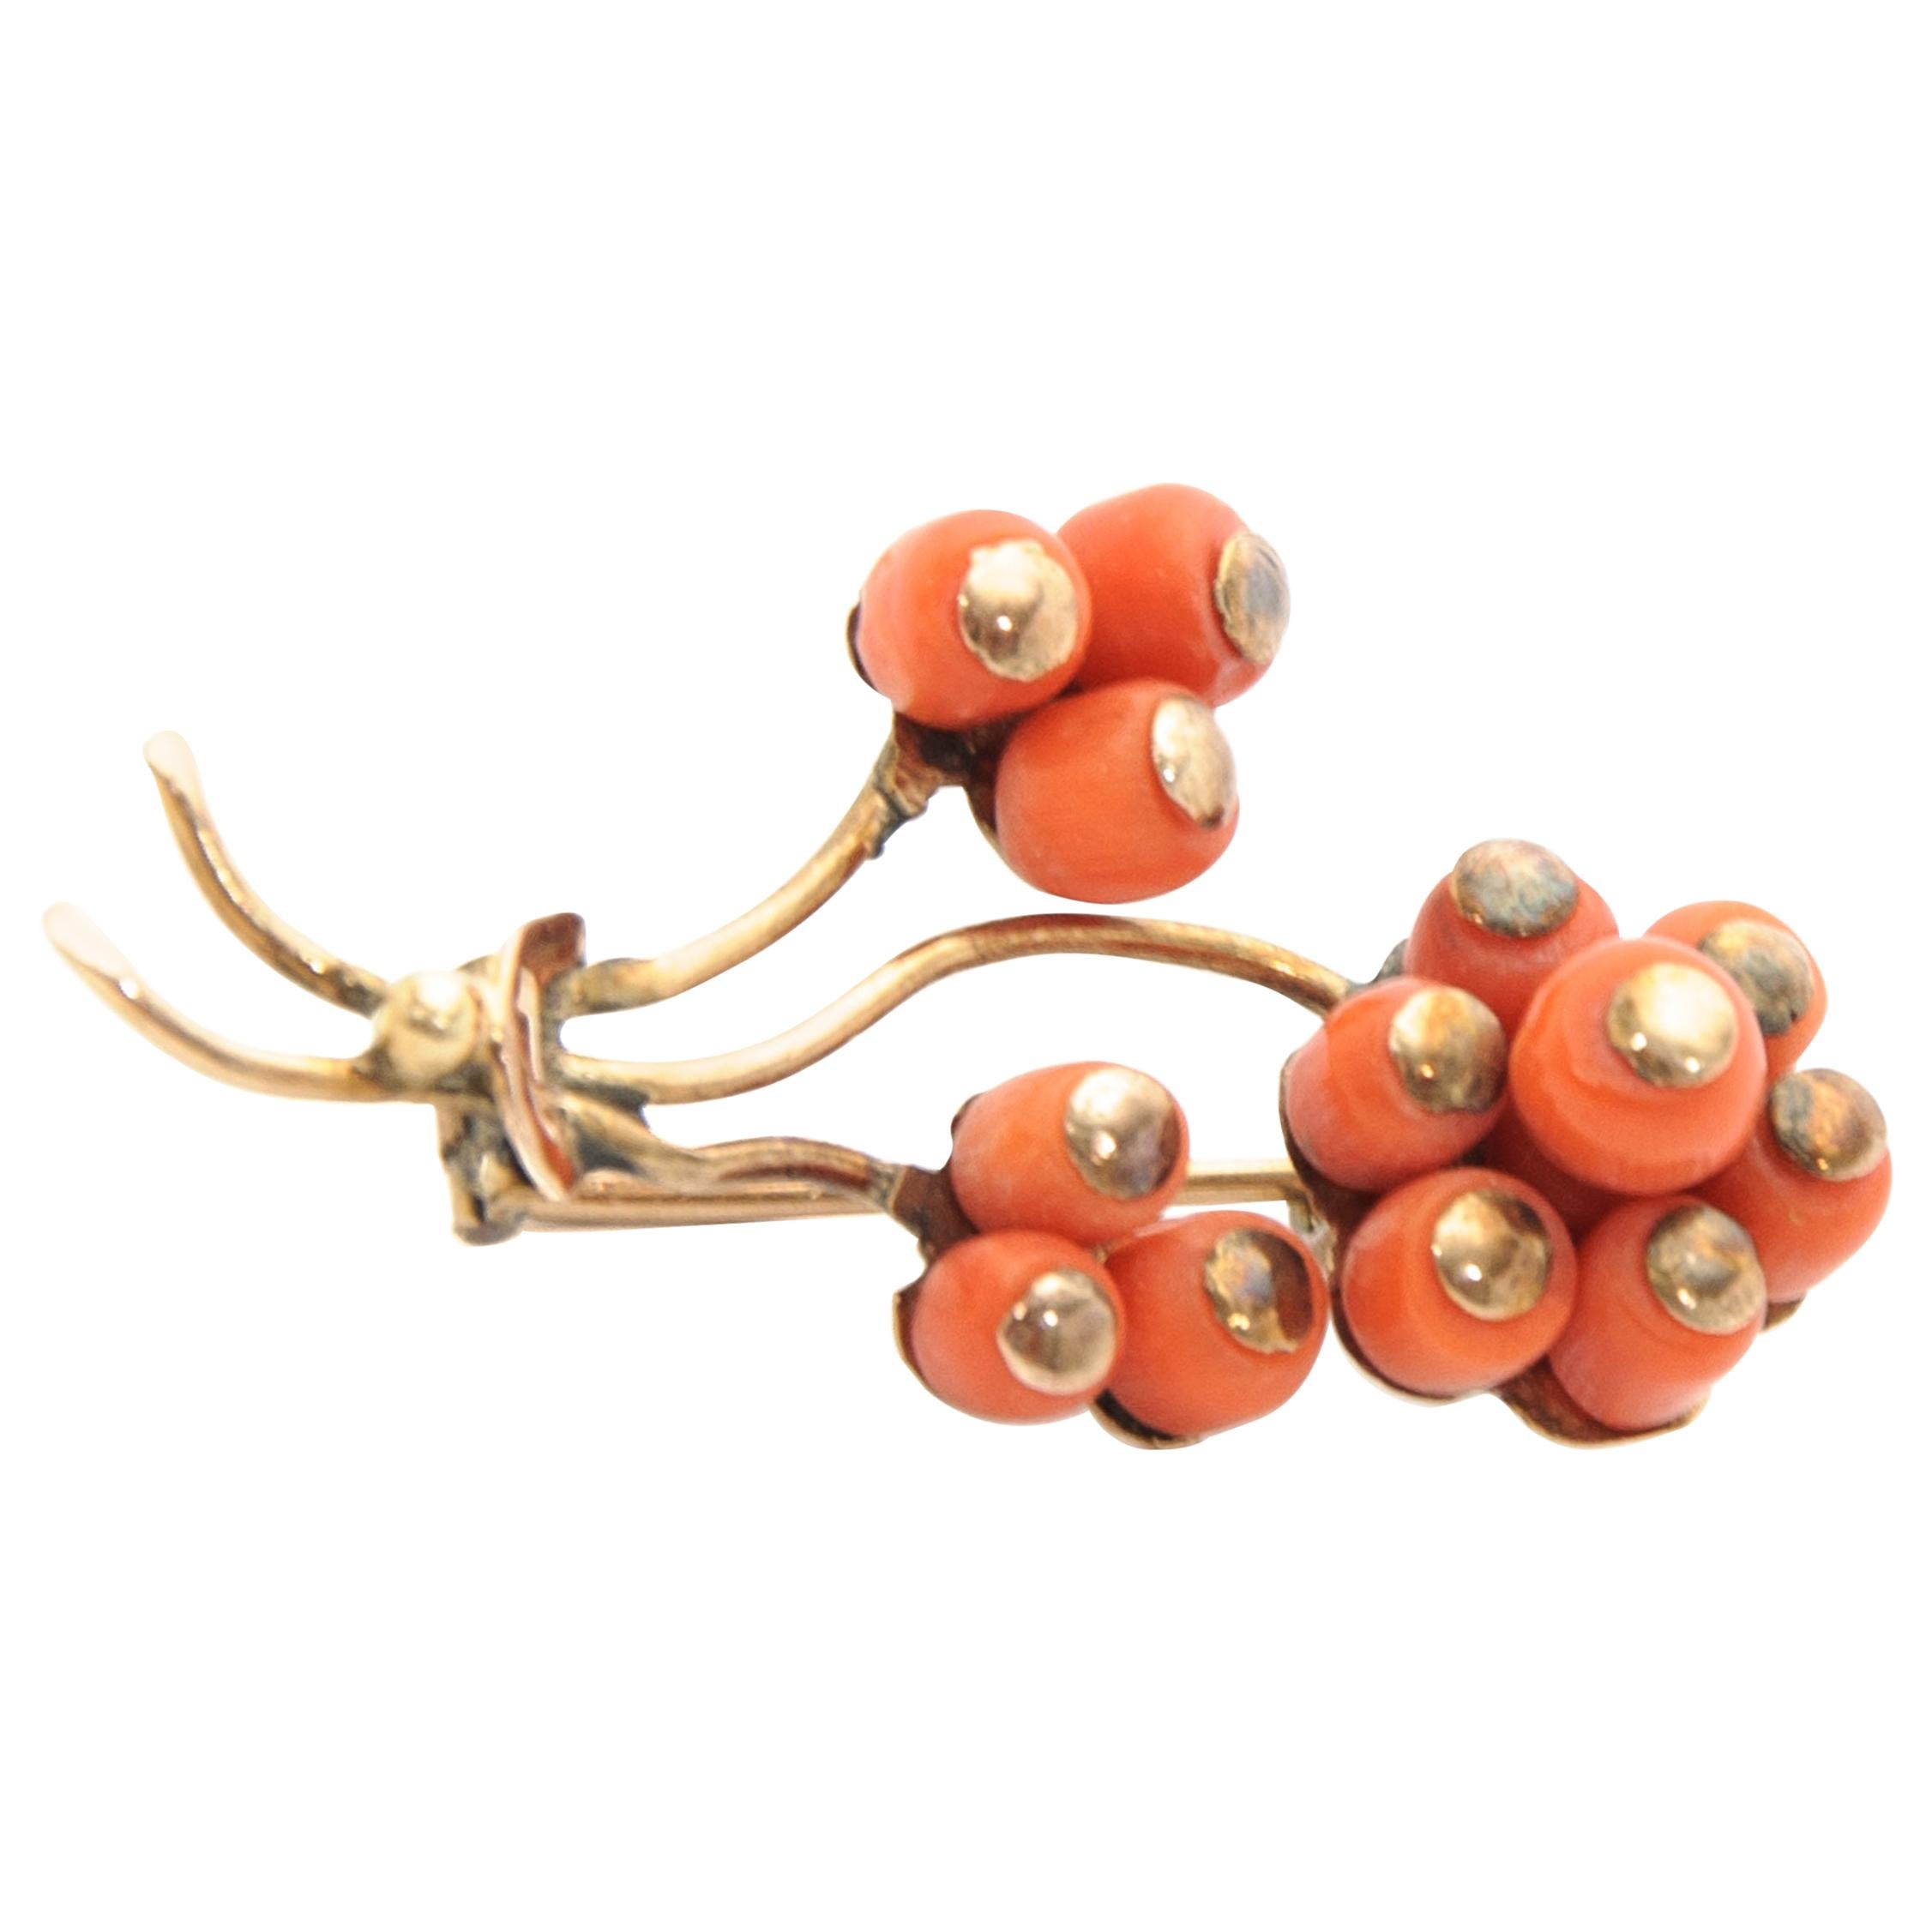 Vintage Coral Beads and Gold Branch Brooch